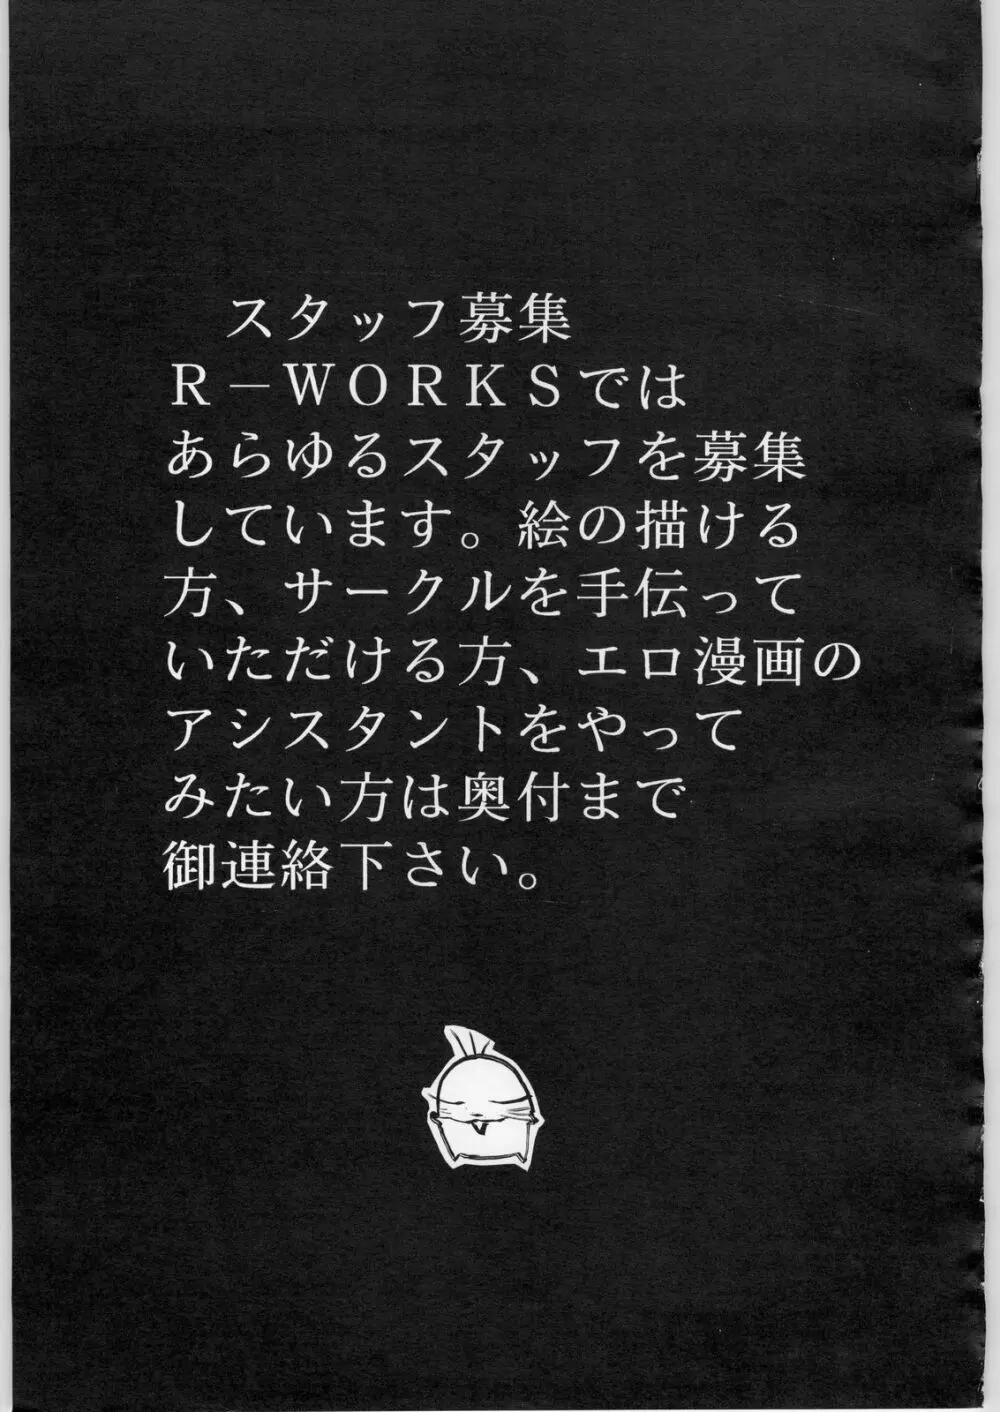 R-Works 1st Book 44ページ